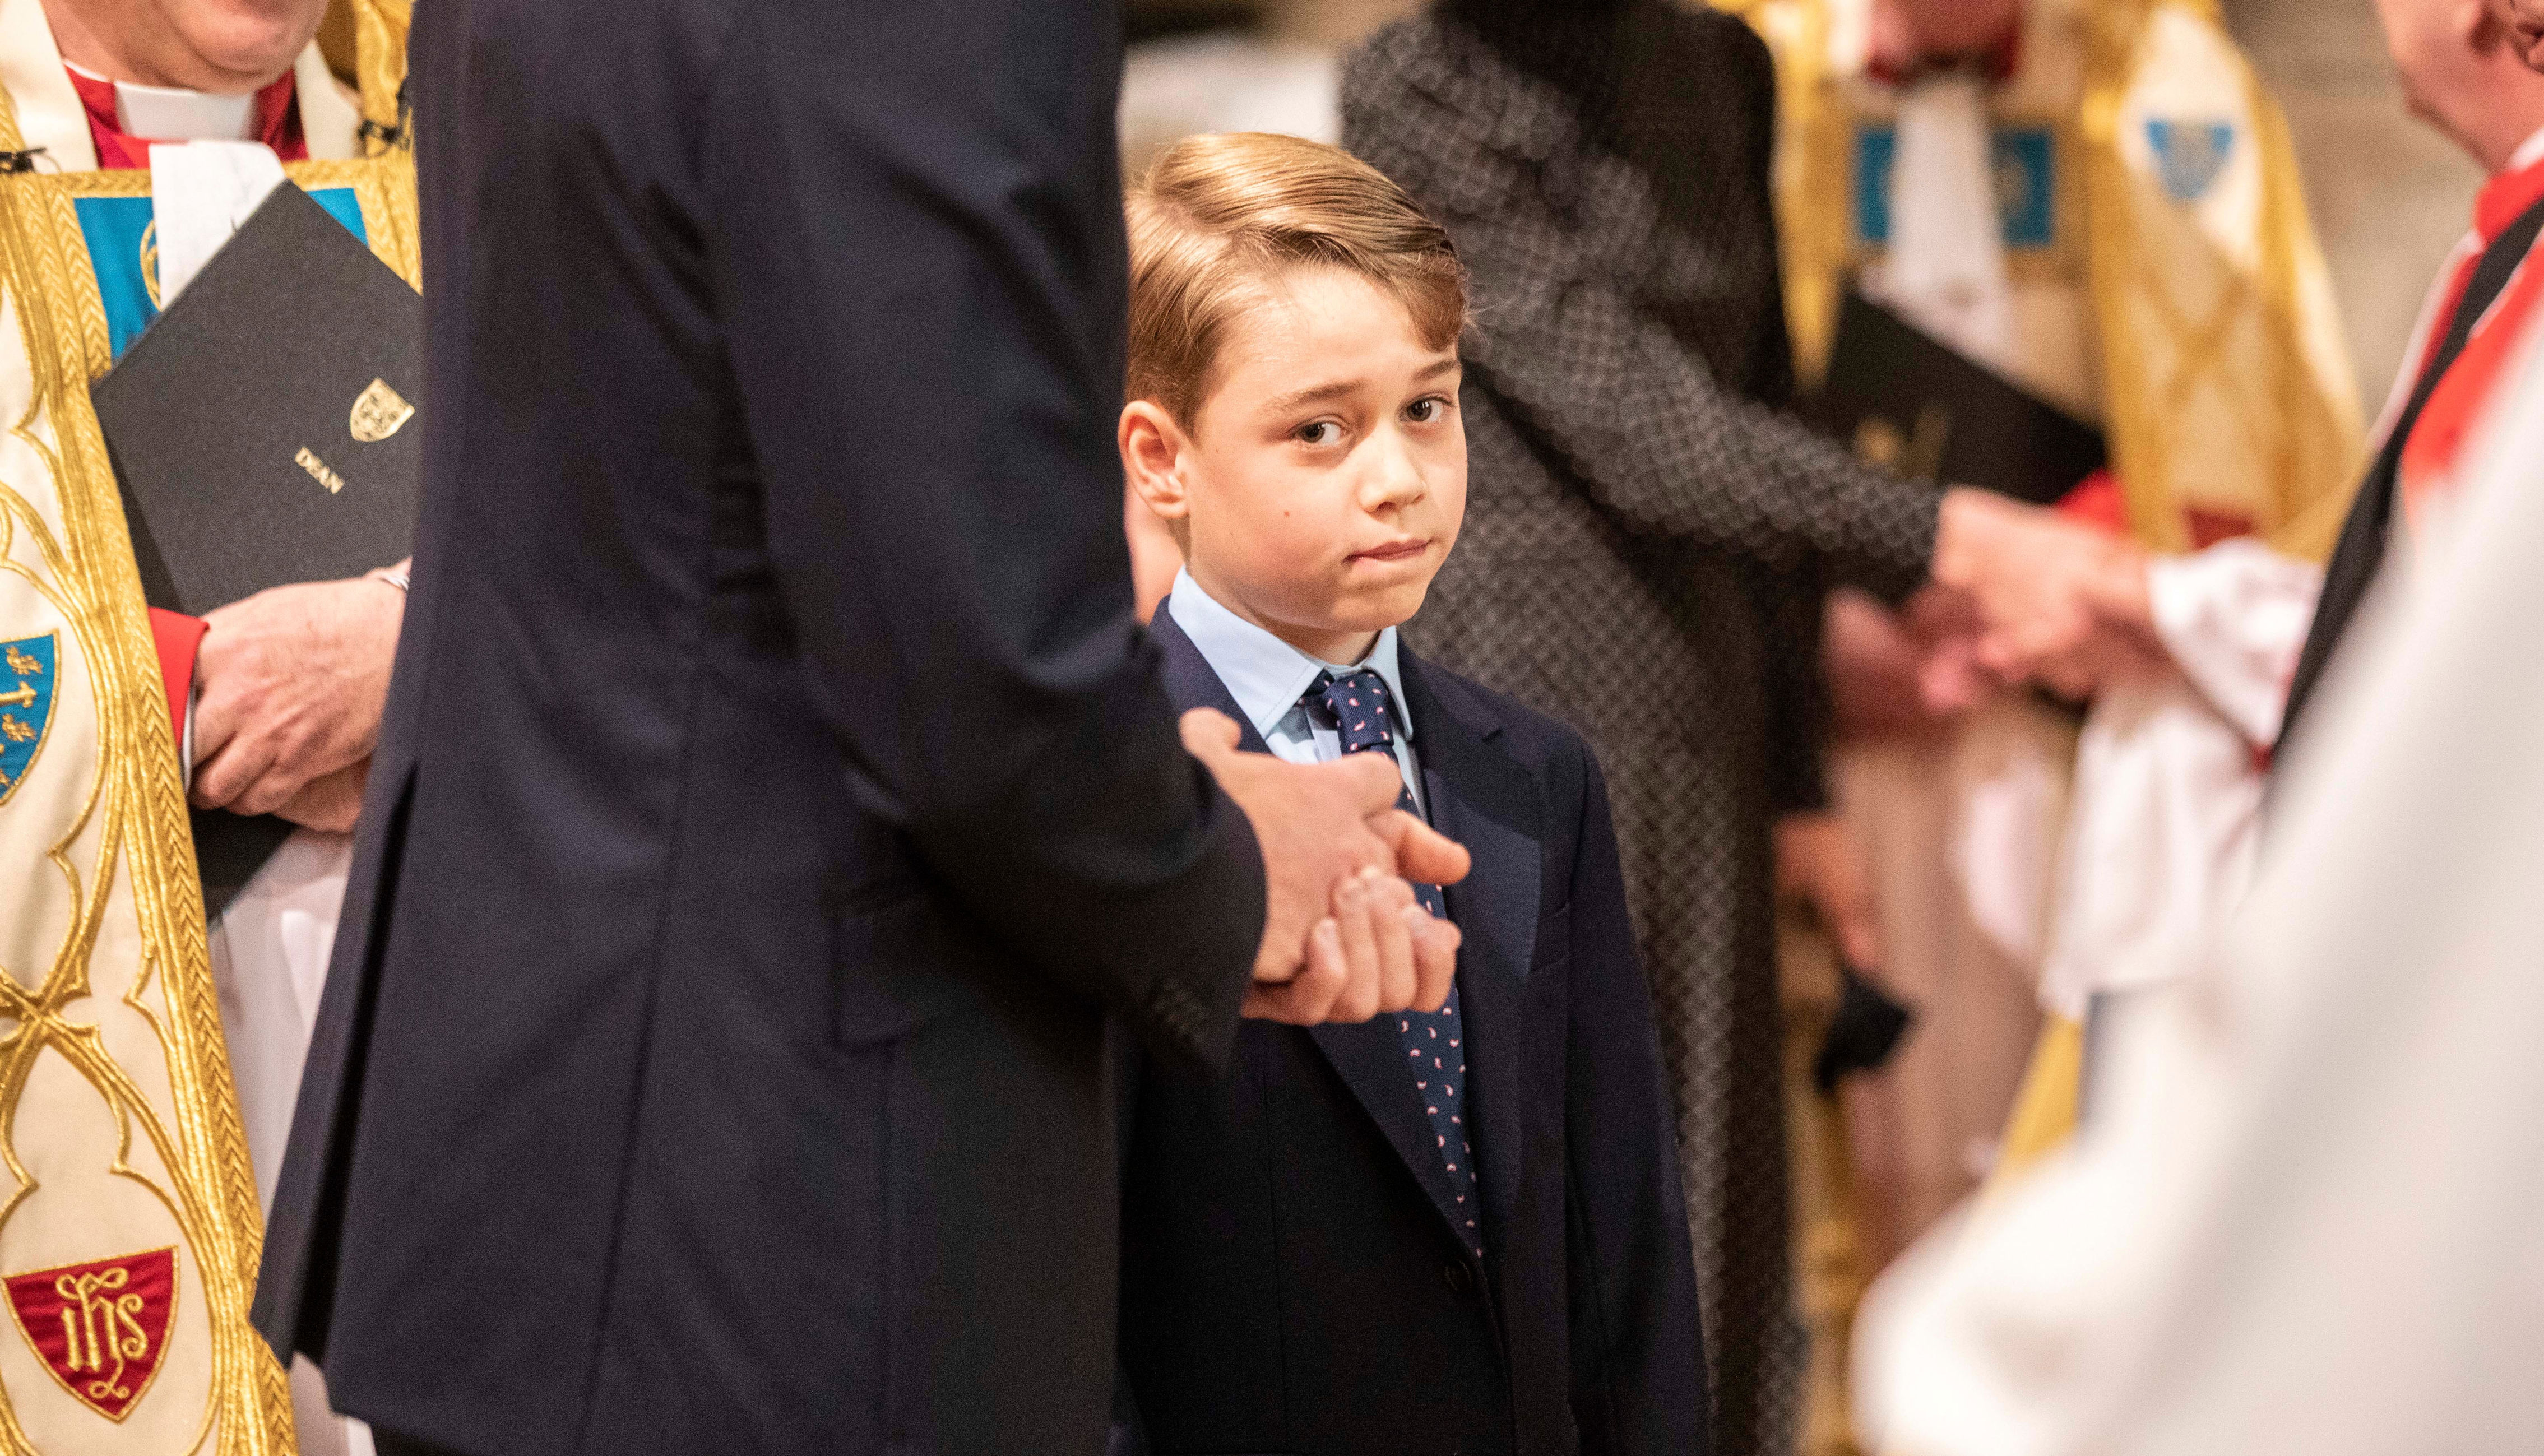 <p>Prince George stood next to his father as he waited to greet clergy members at <a href="https://www.wonderwall.com/celebrity/princess-charlotte-and-prince-george-join-william-kate-and-the-queen-more-great-photos-from-the-royals-prince-philip-memorial-service-of-thanksgiving-578498.gallery">the service of thanksgiving celebrating the life of his late great-grandfather</a>, Prince Philip, at Westminster Abbey in London on March 29, 2022.</p>